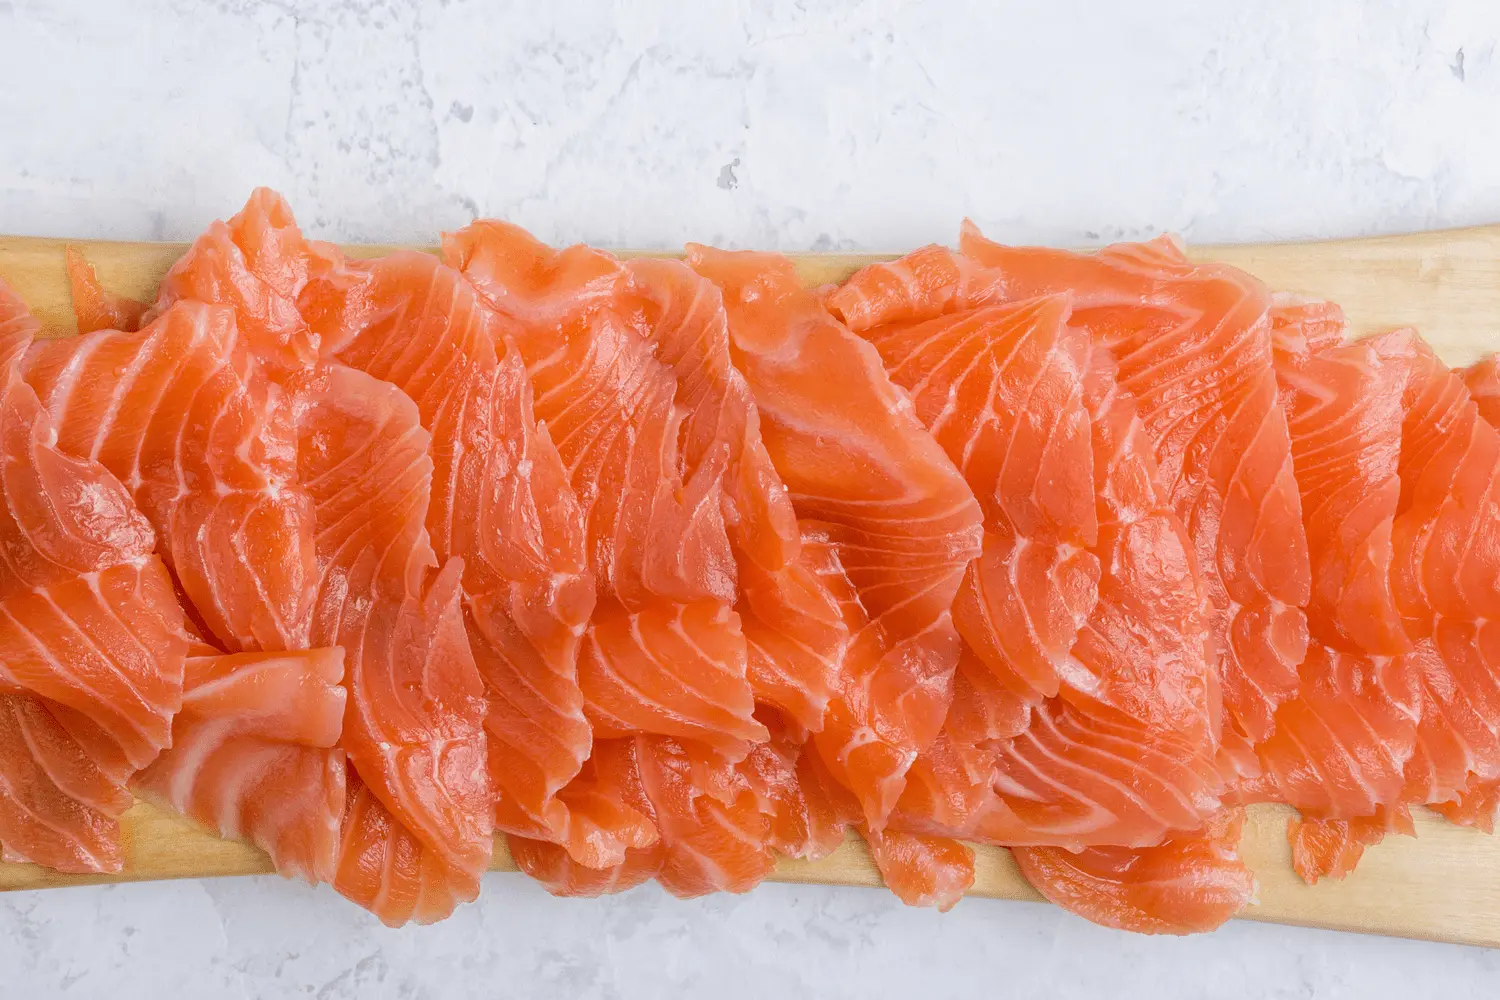 lox and smoked salmon - Is salmon a lox or lock